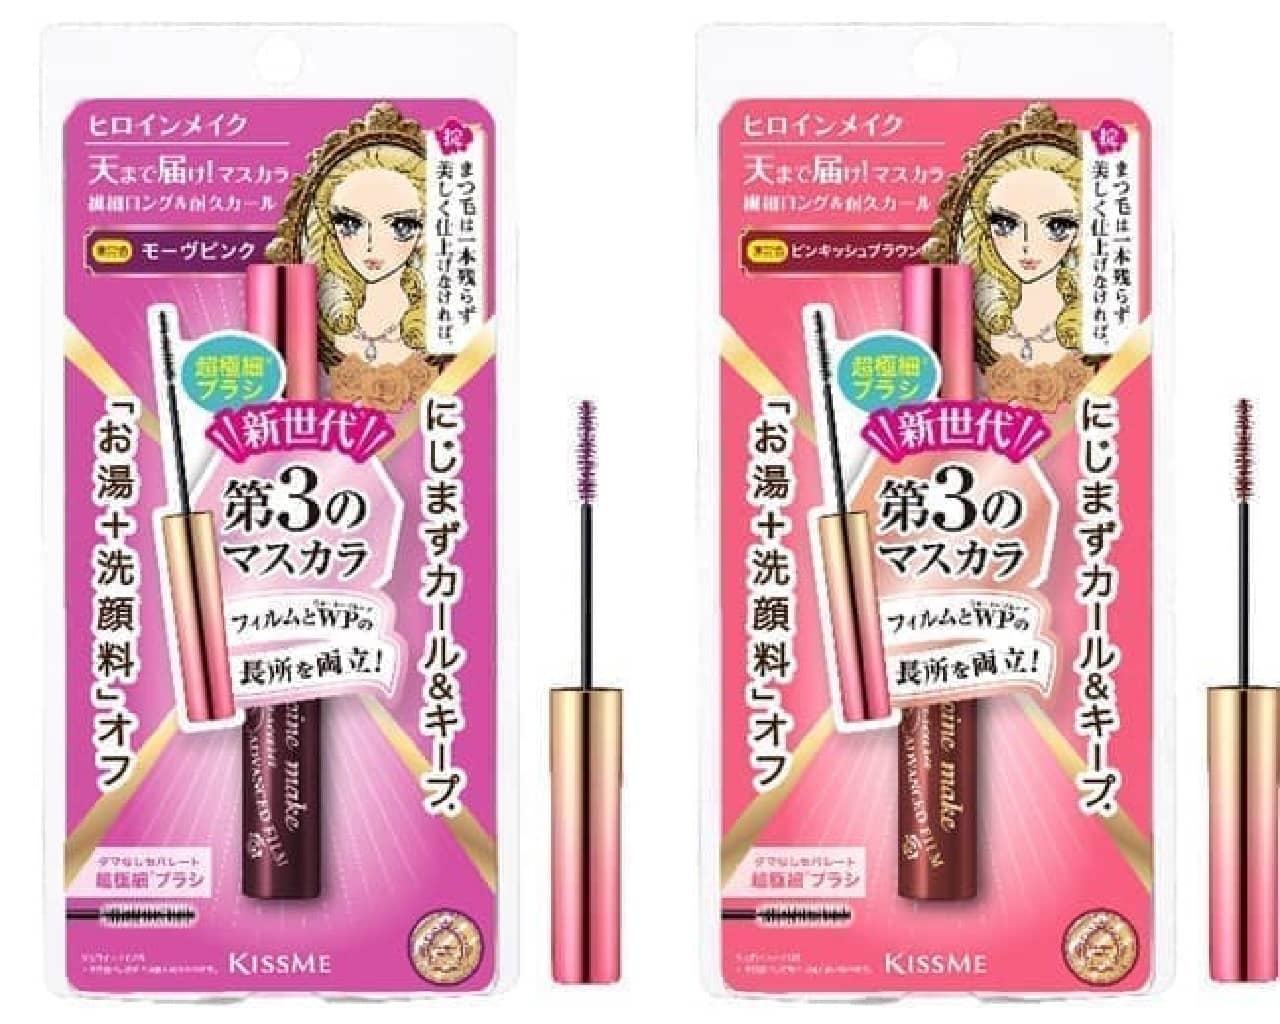 Limited quantity colors of "Heroine Makeup Micro Mascara Advanced Film" "50 Mauve Pink" "51 Pinkish Brown"